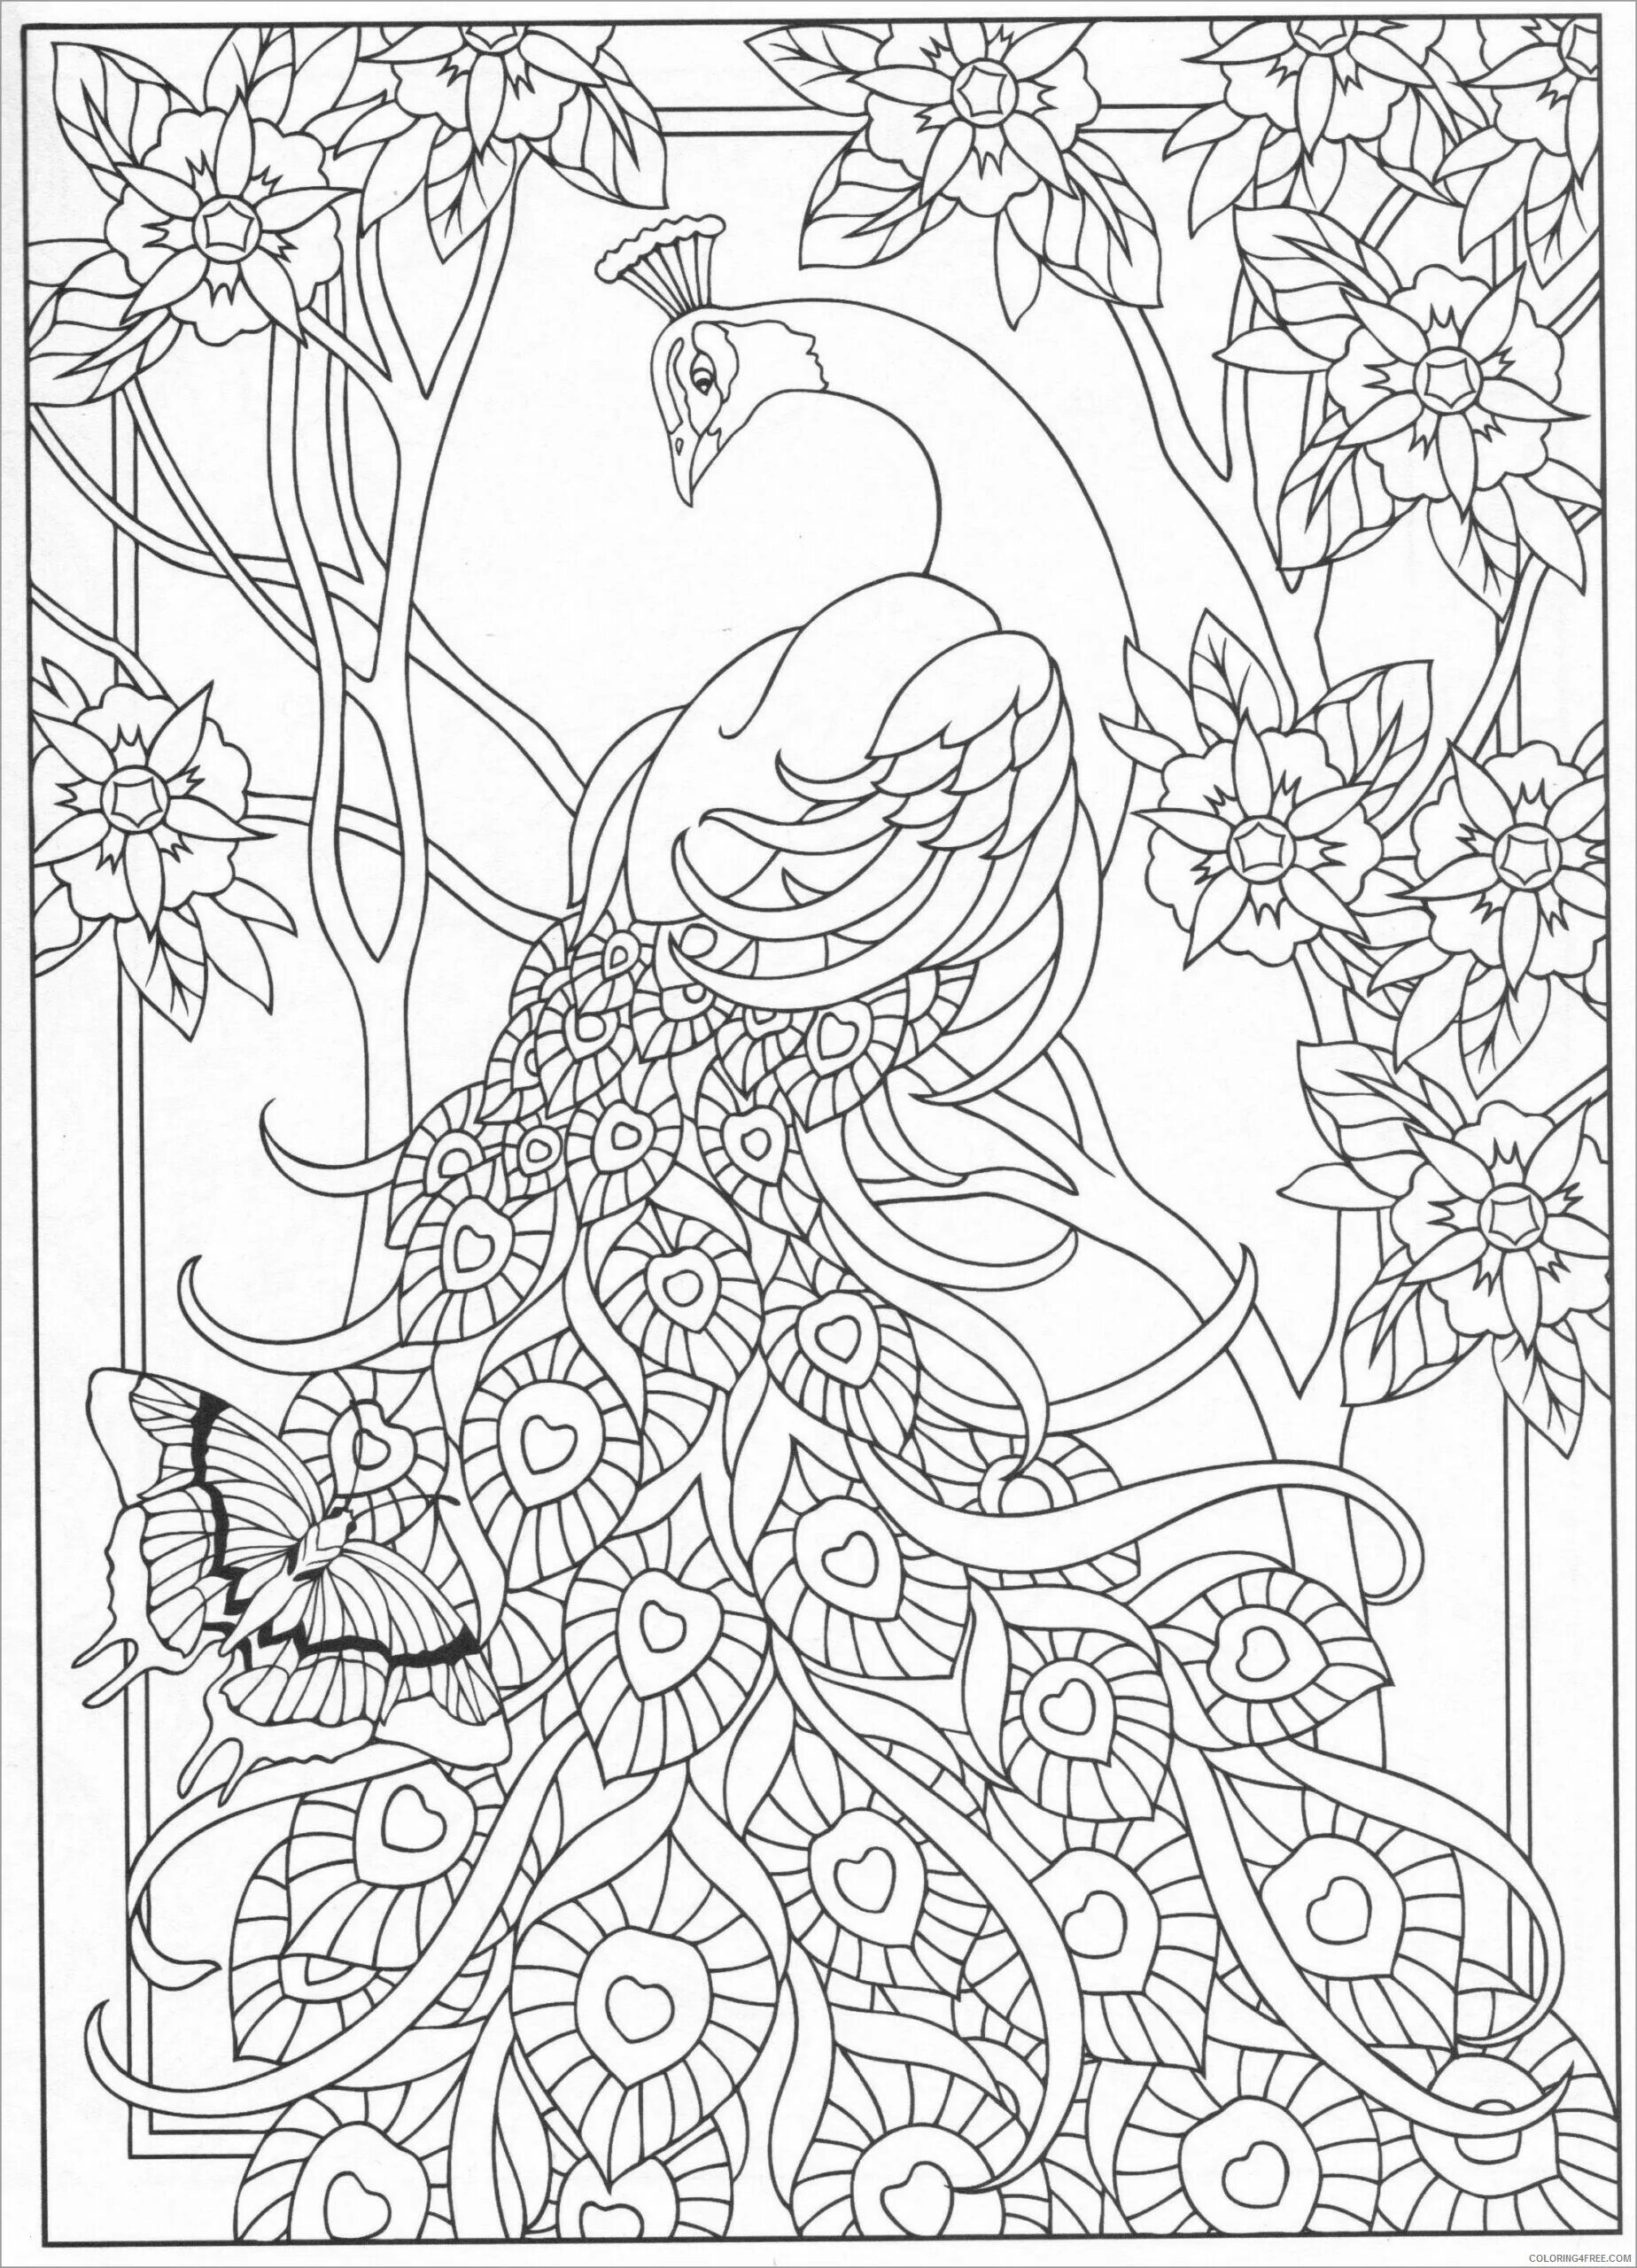 Decorative coloring peacock by numbers